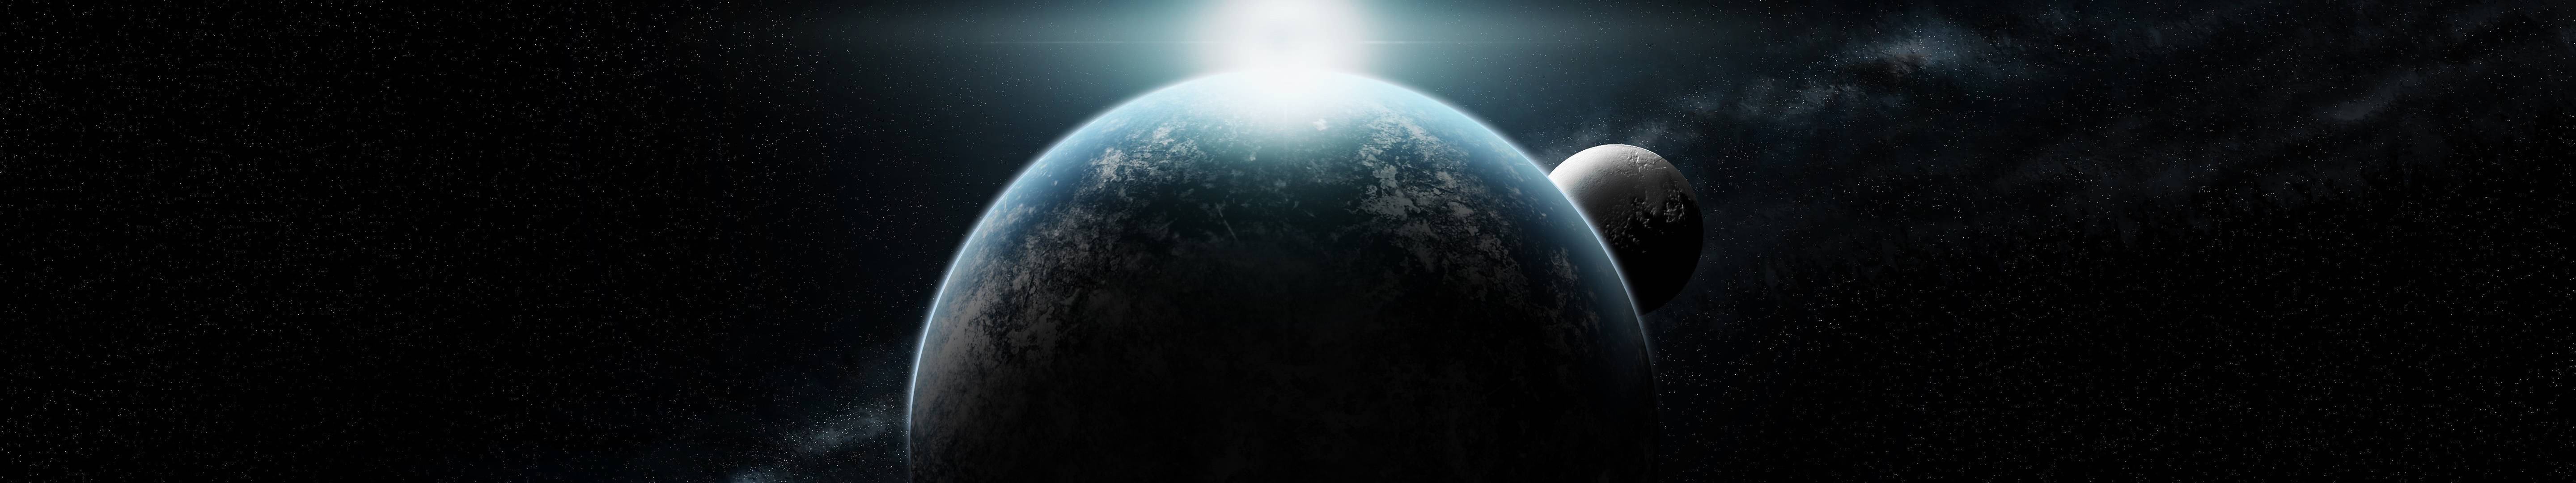 Earth And Moon In Dark Universe Background